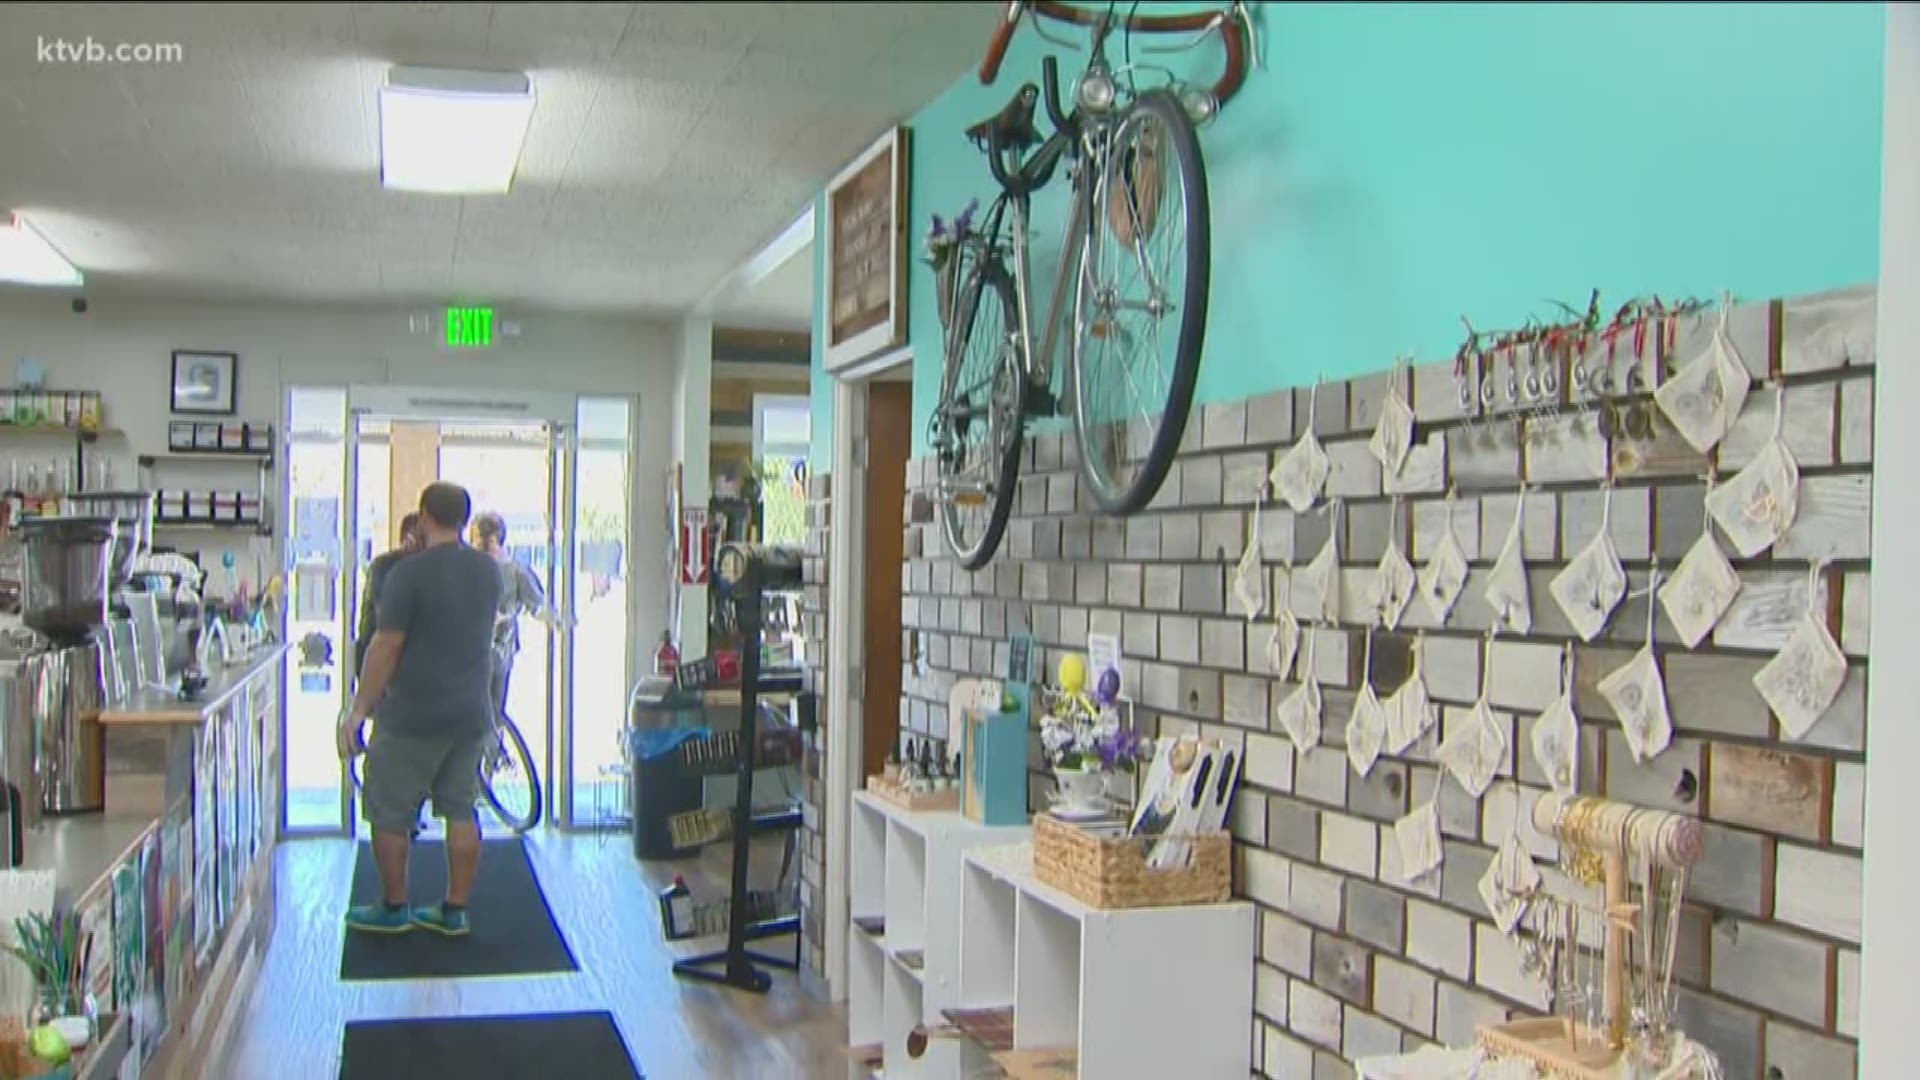 This Boise Bench business is helping to revitalize the neighborhood.